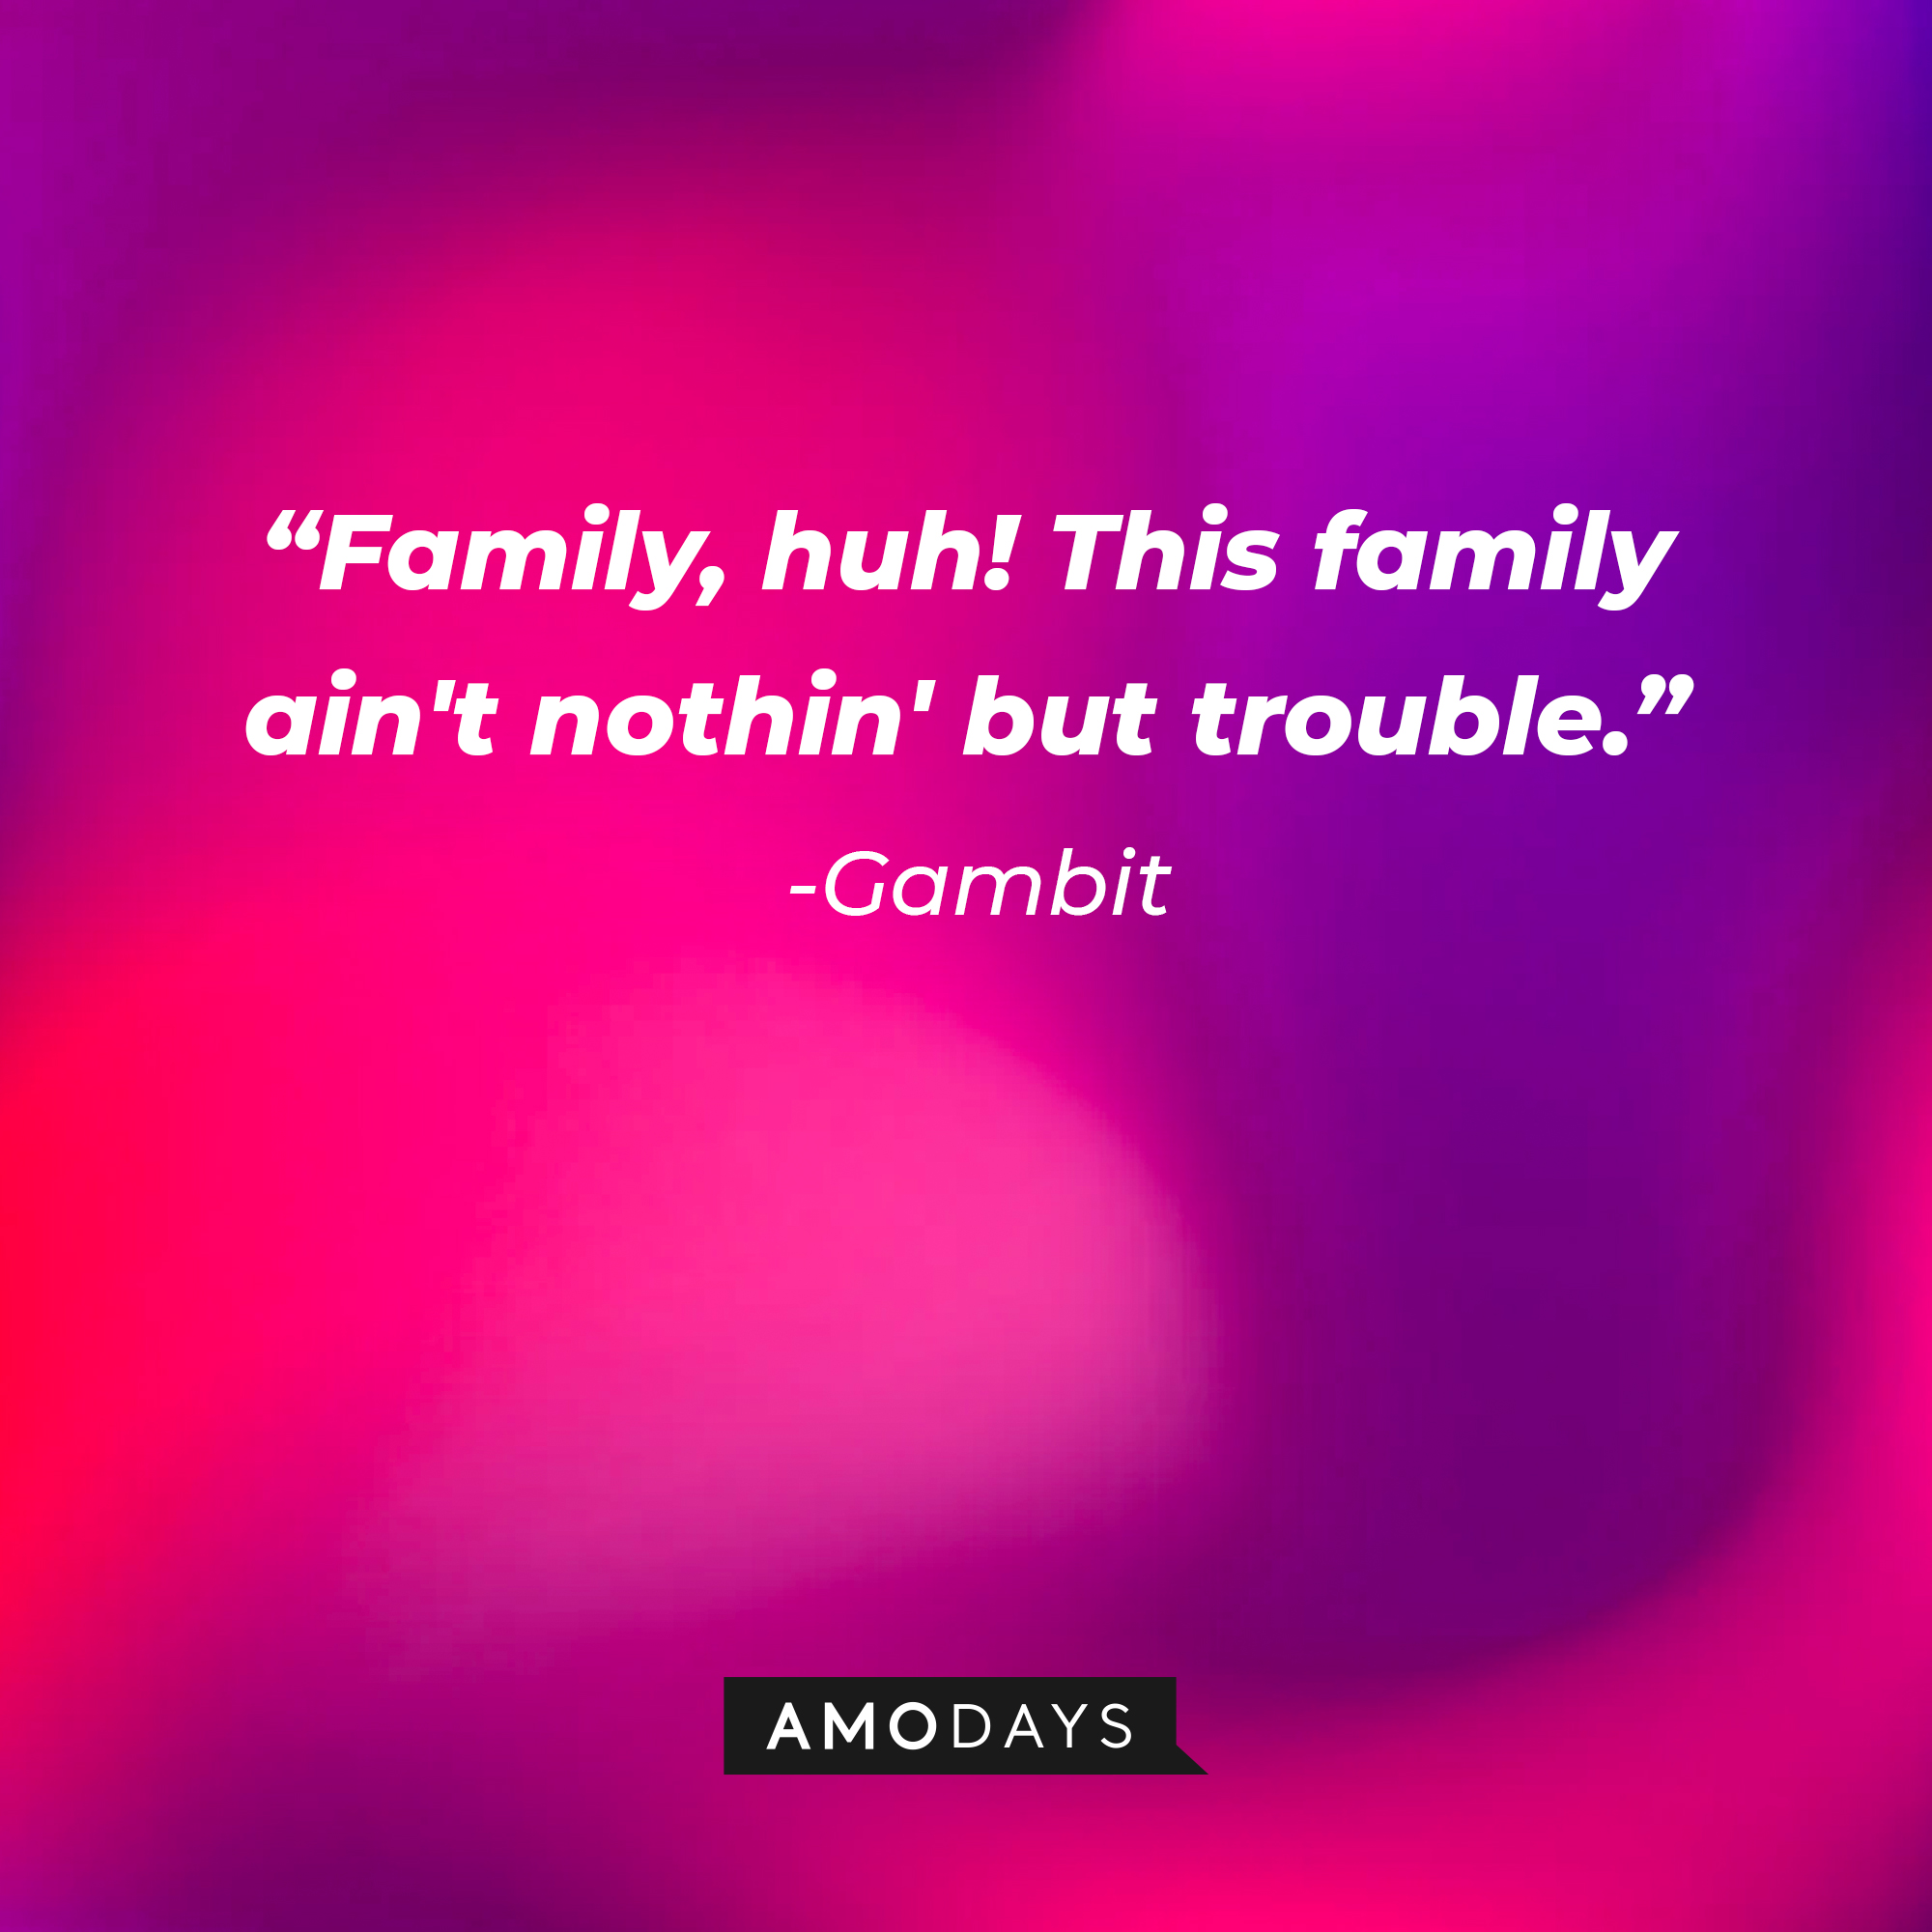 Gambit’s quote: “Family, huh! This family ain't nothin' but trouble.”  | Source: AmoDays